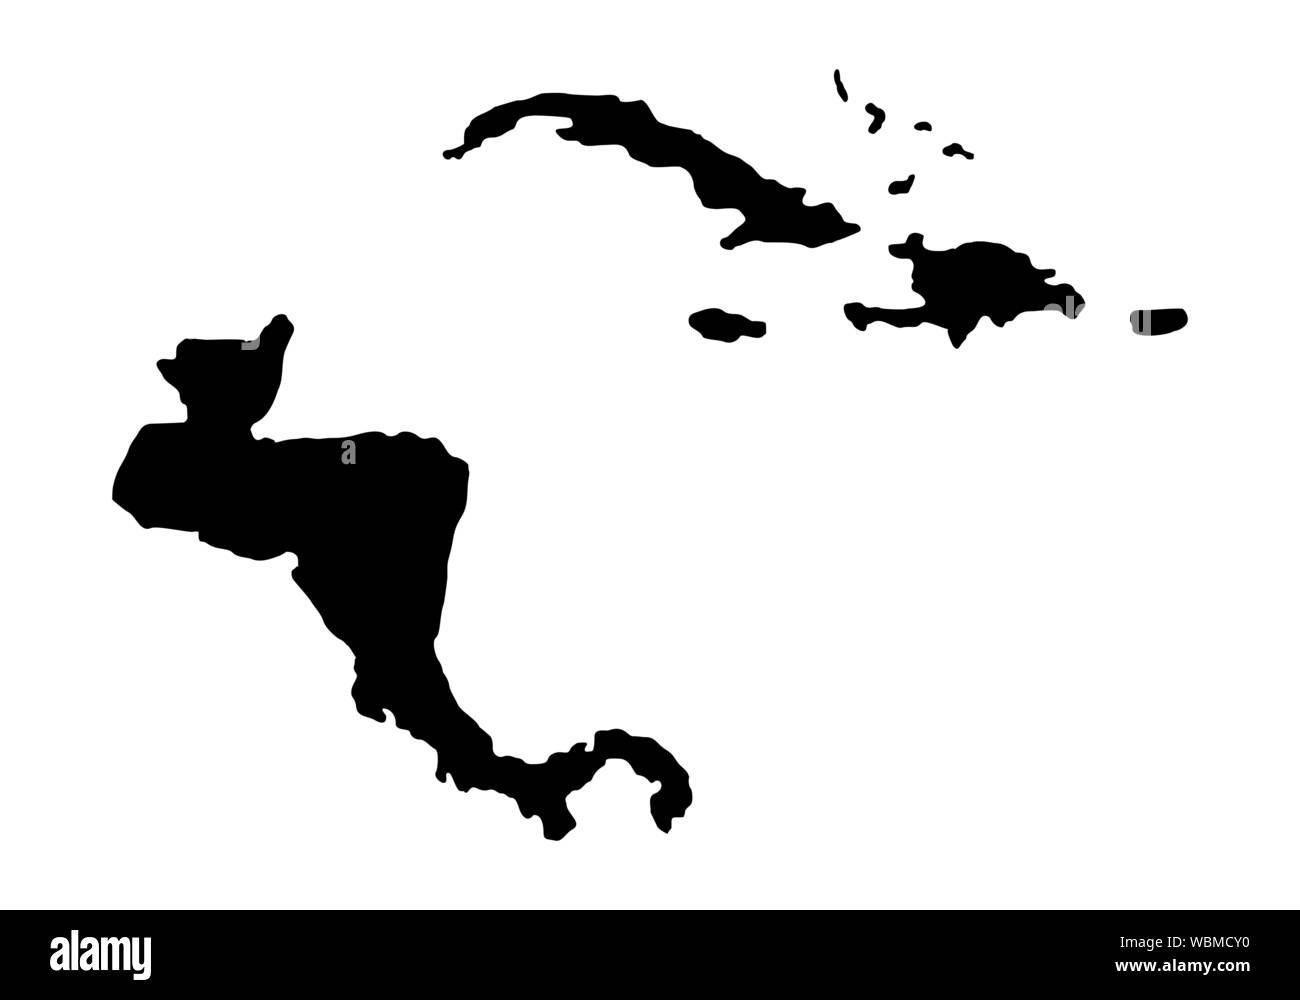 Central America dark silhouette map isolated on white background Stock Vector